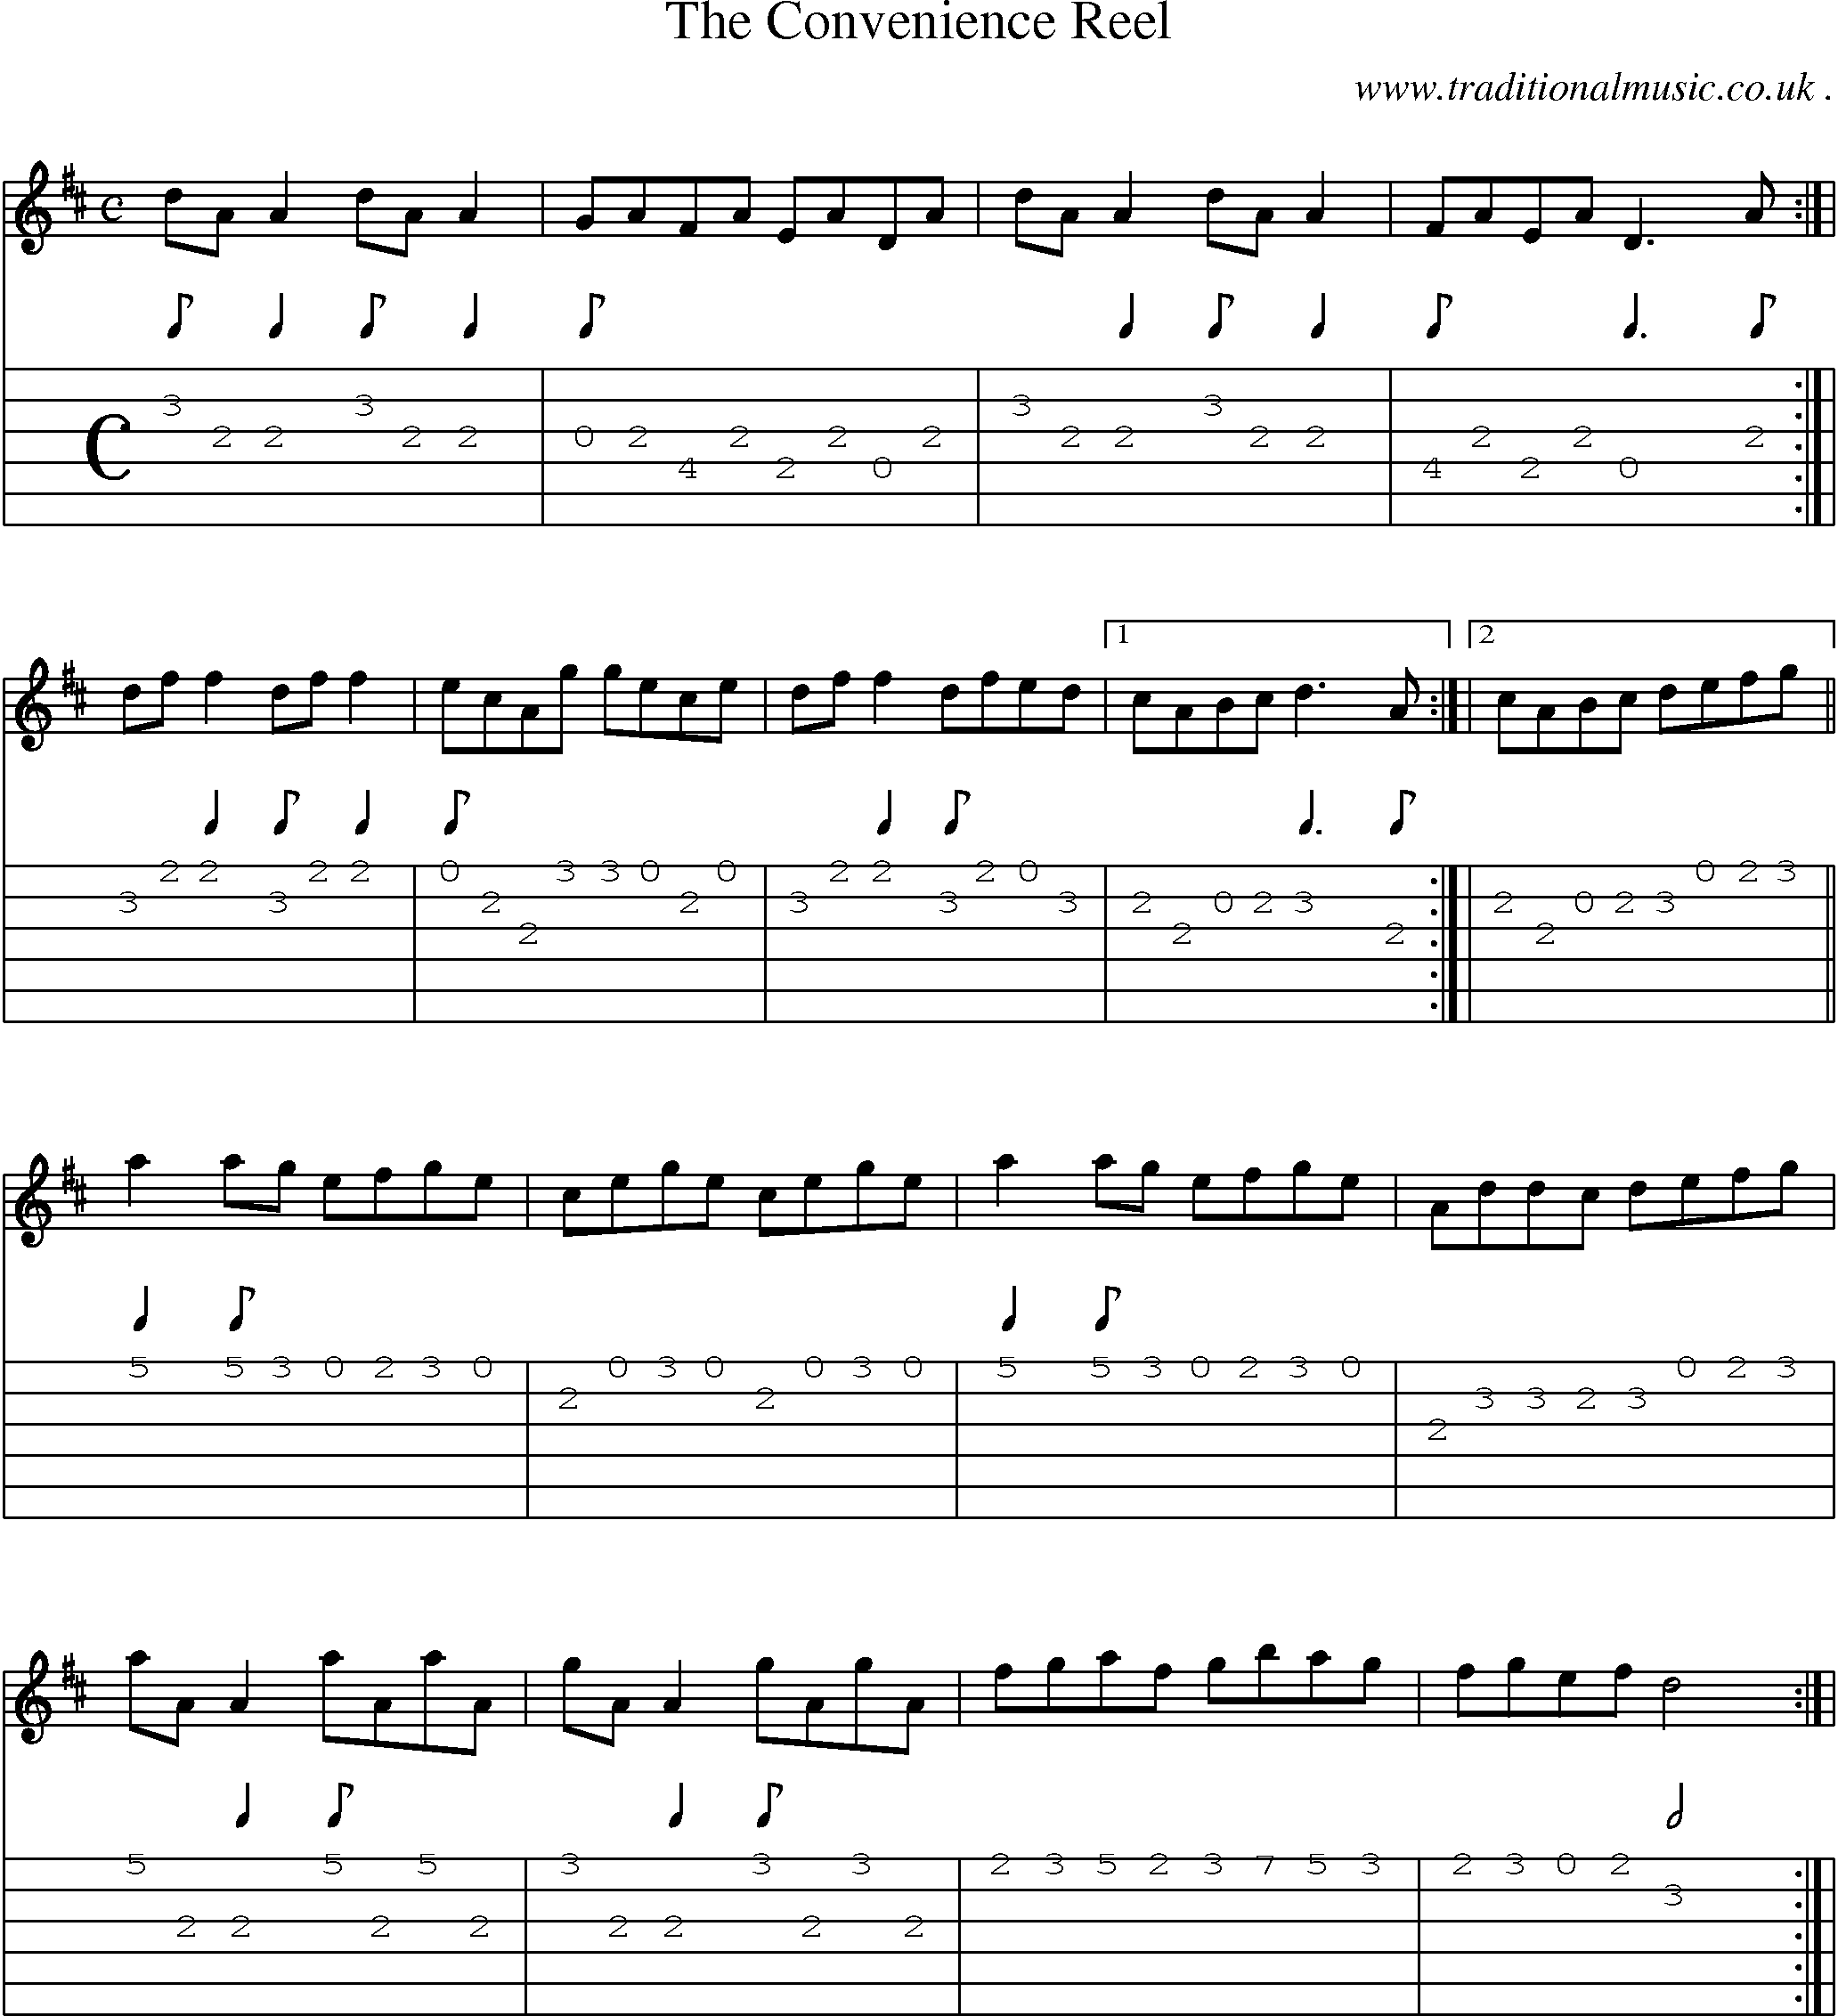 Sheet-Music and Guitar Tabs for The Convenience Reel